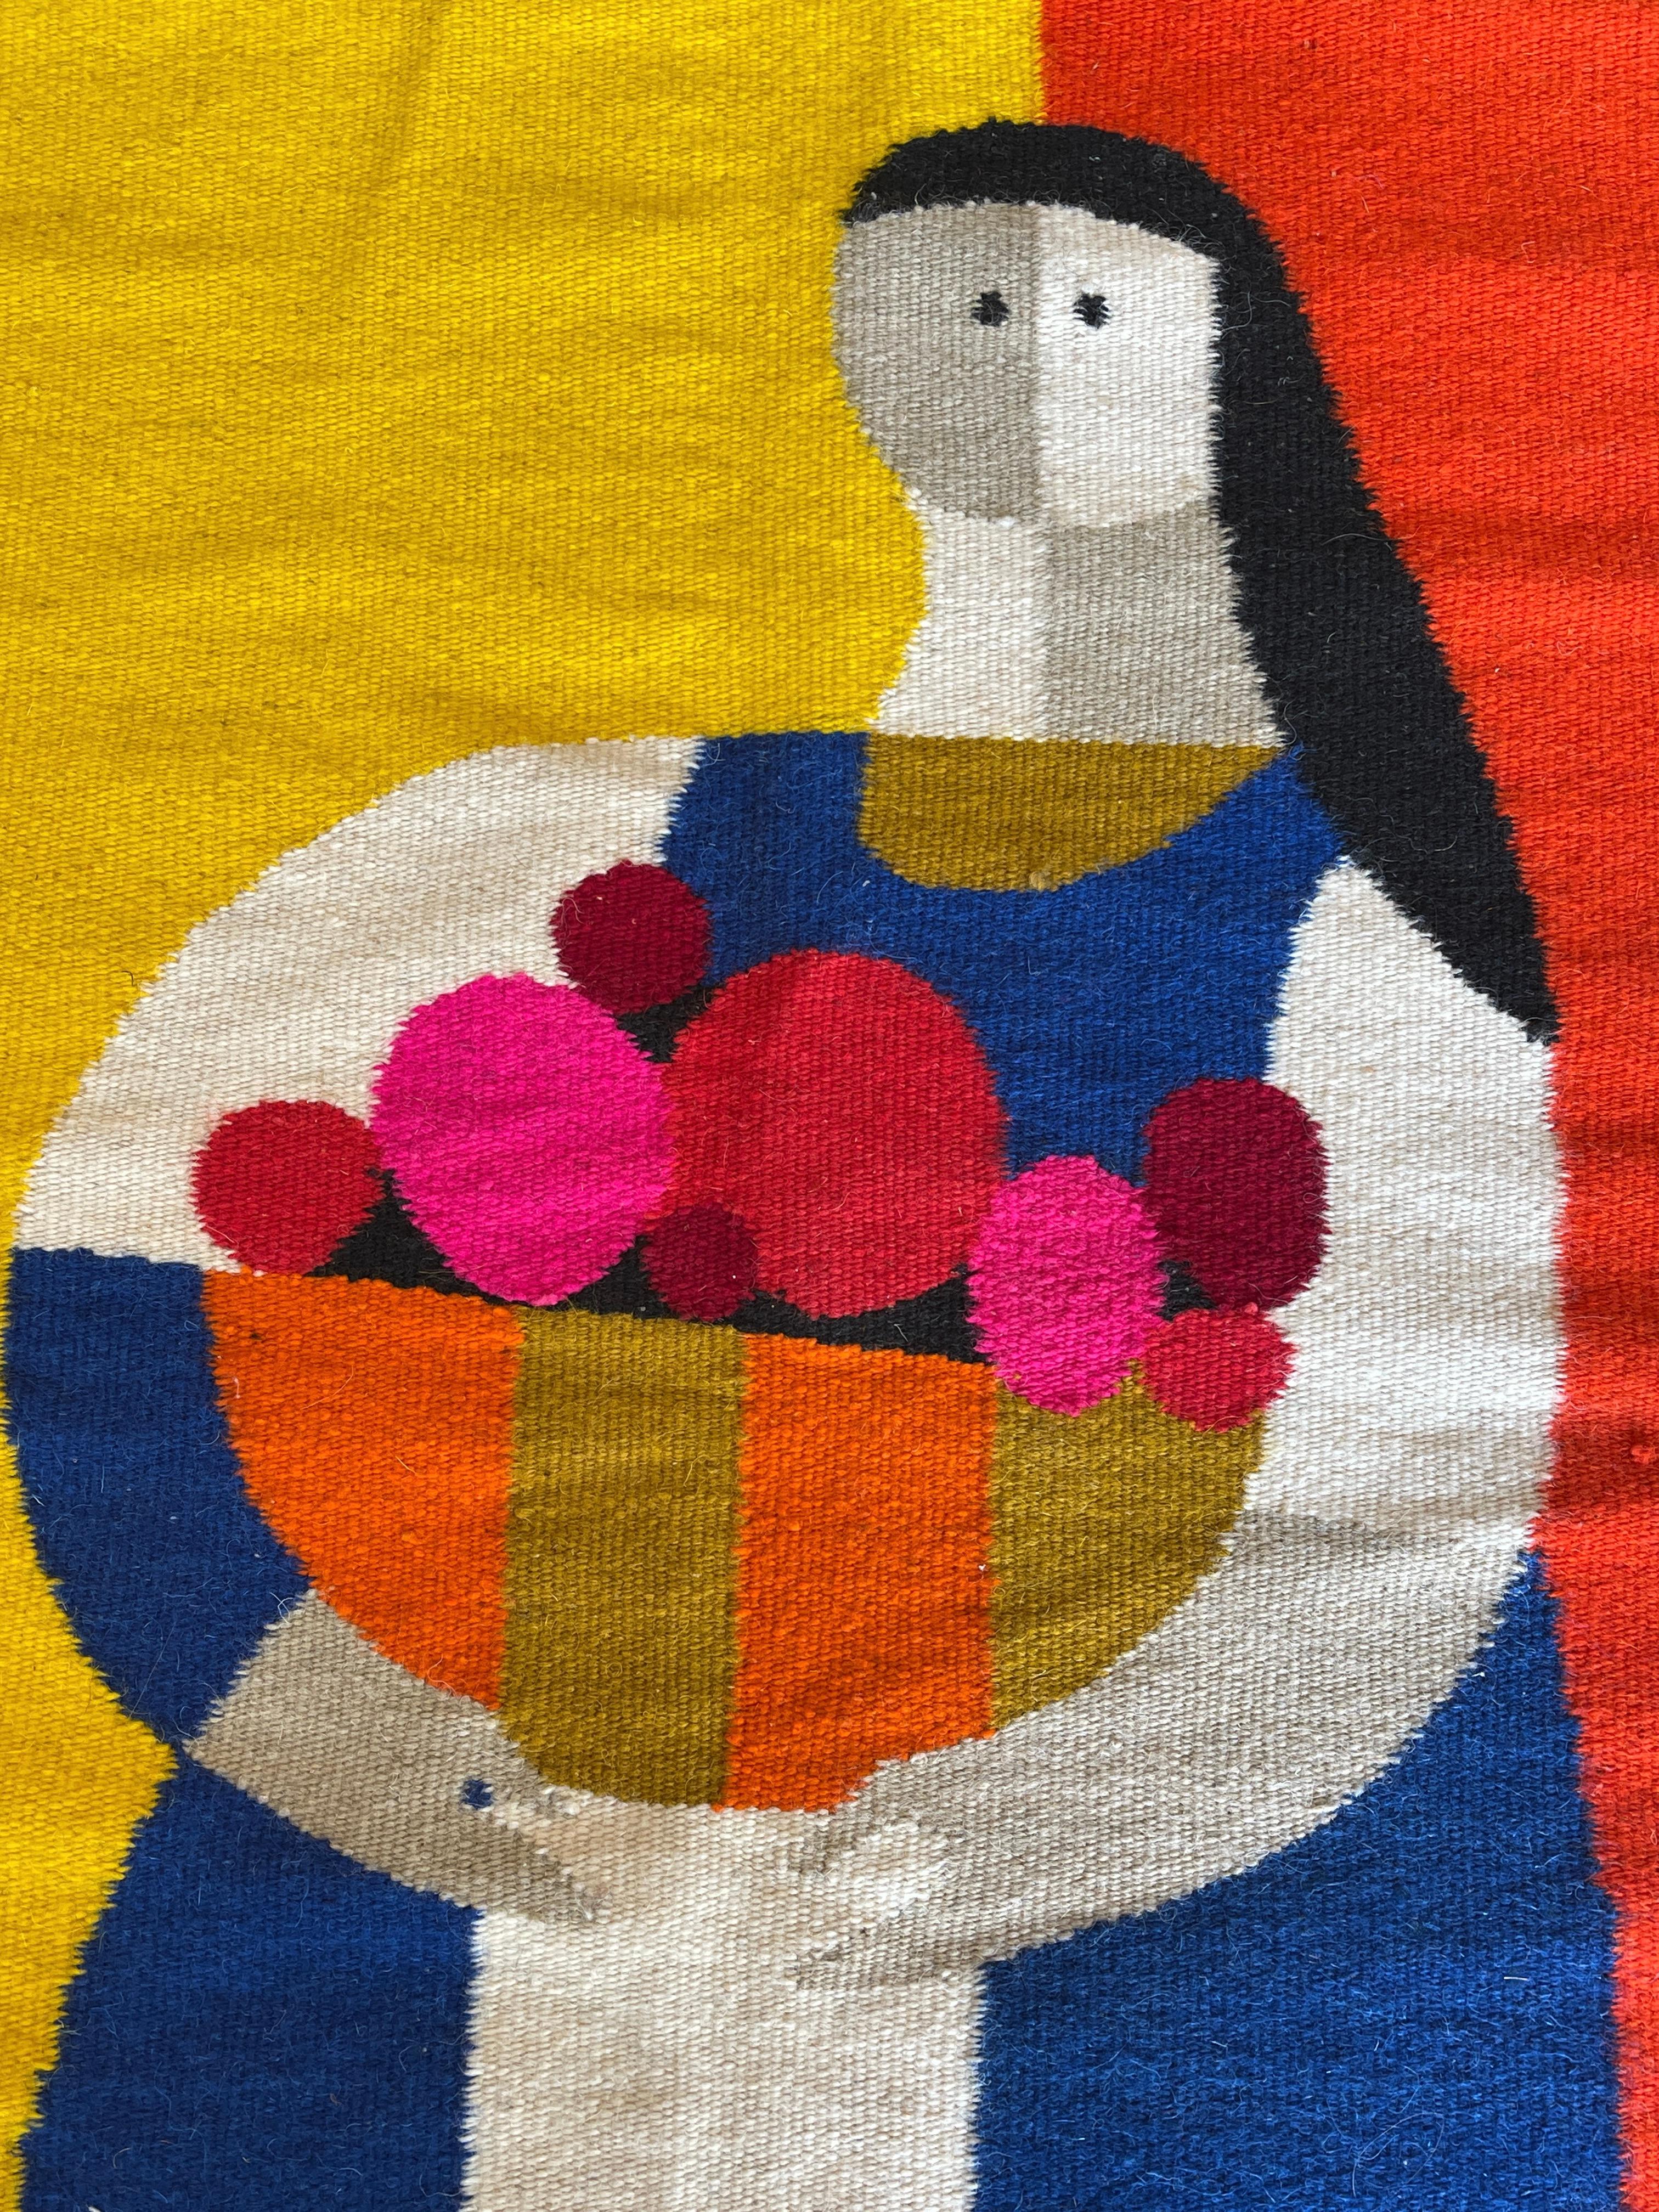 Woven Stunning Evelyn Ackerman Design Vibrant Wool Wall Hanging Tapestry 'Campasena'